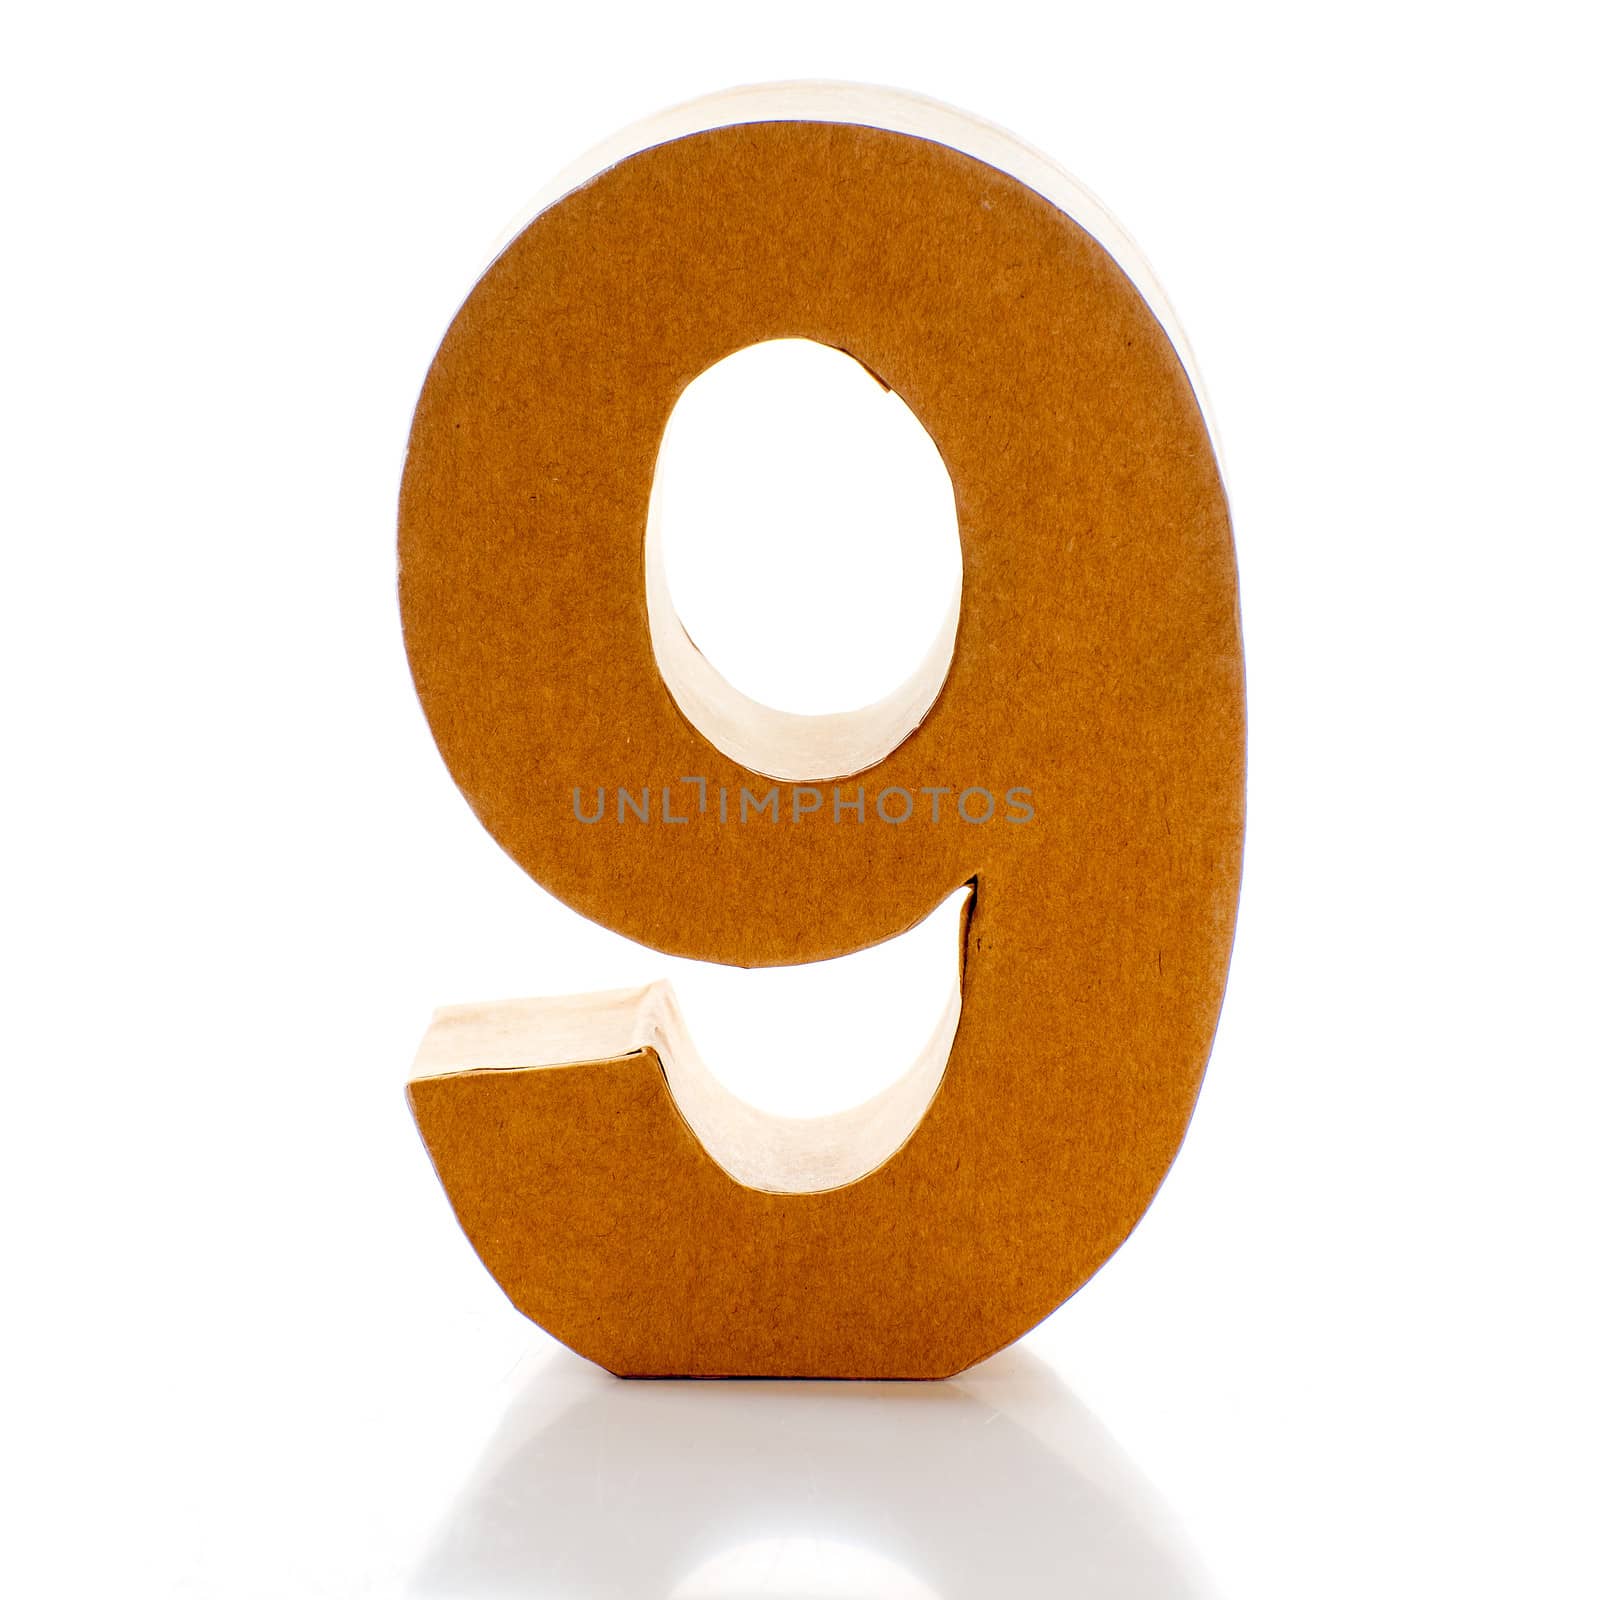 Number Nine on a white background